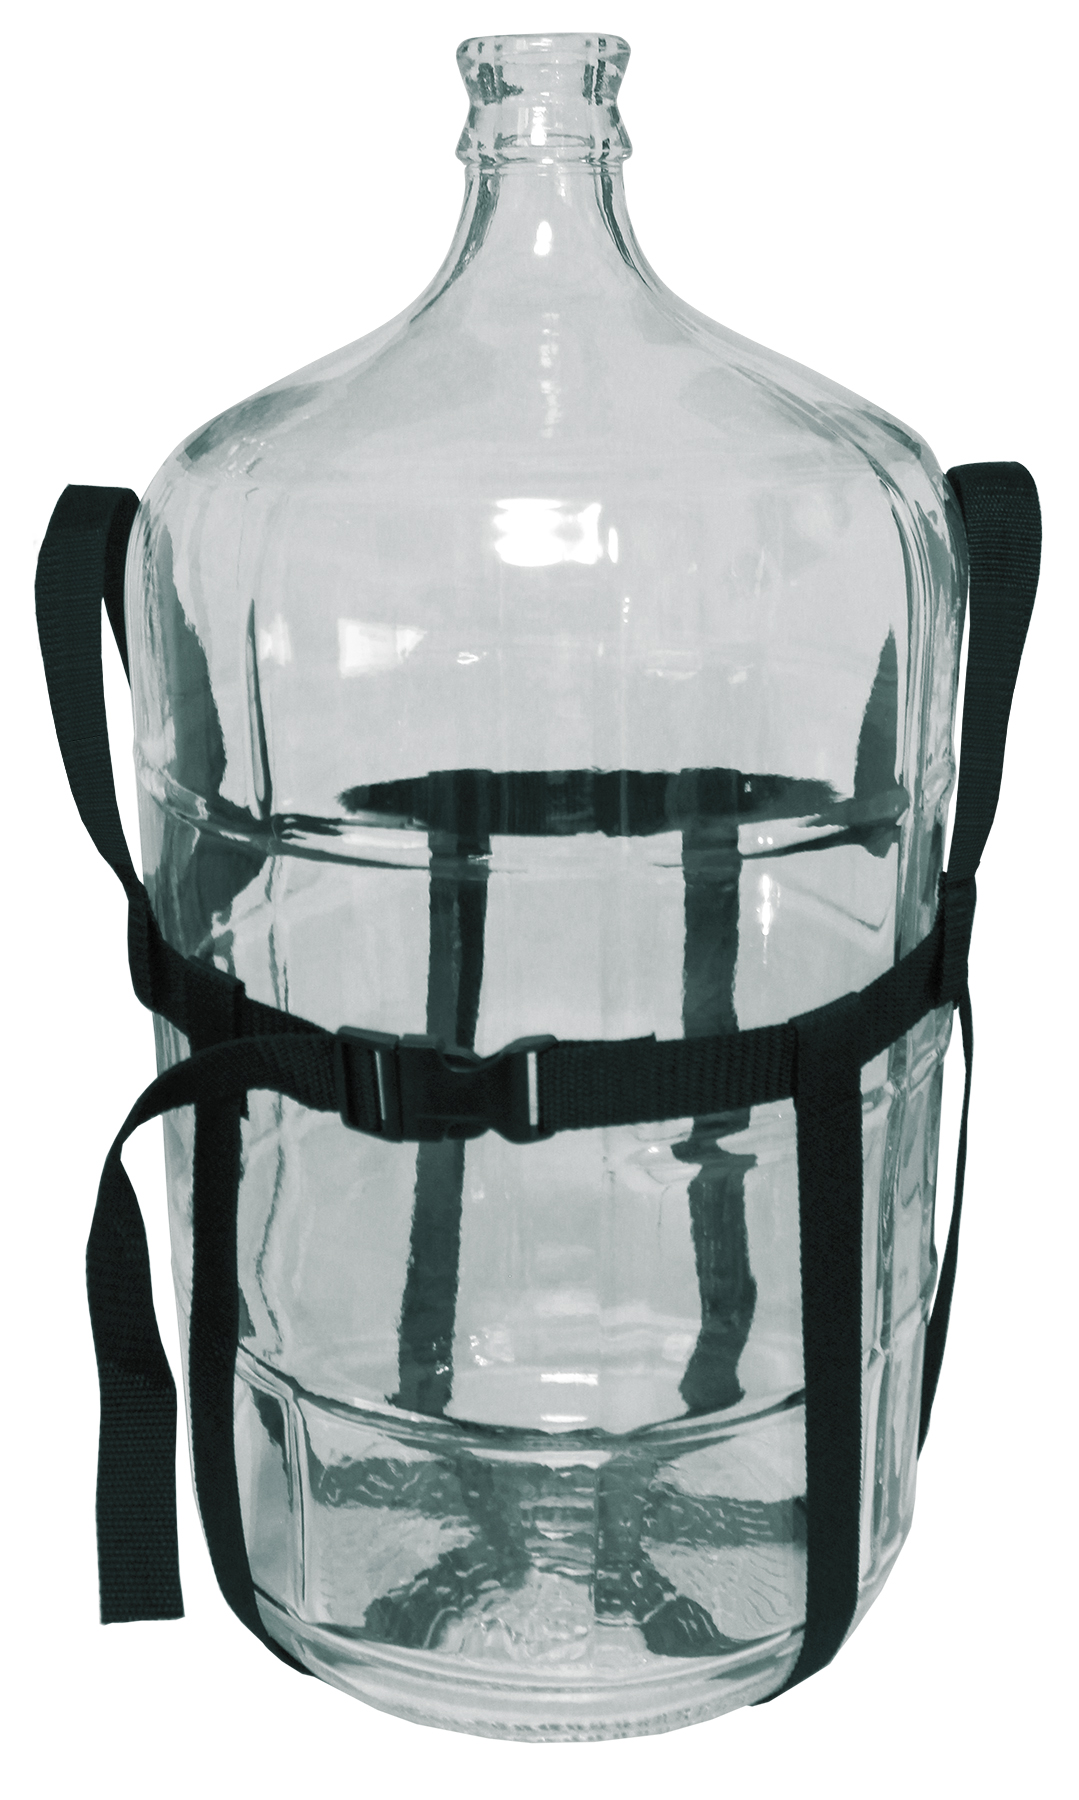 Brew Hauler Carboy Carrying Straps